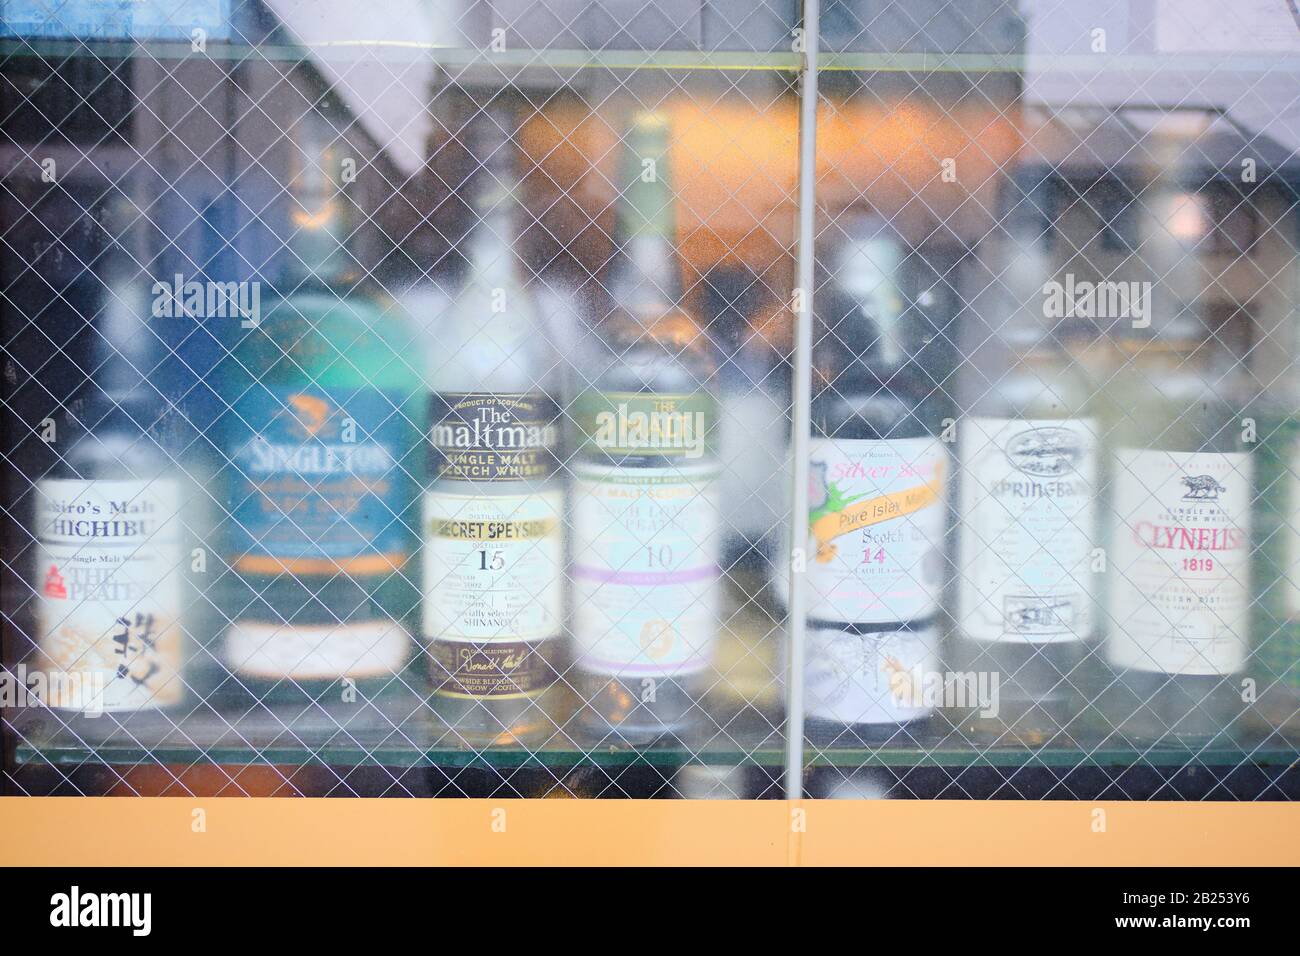 Bottles of Scottish whisky in a window of a Japanese bar. Stock Photo